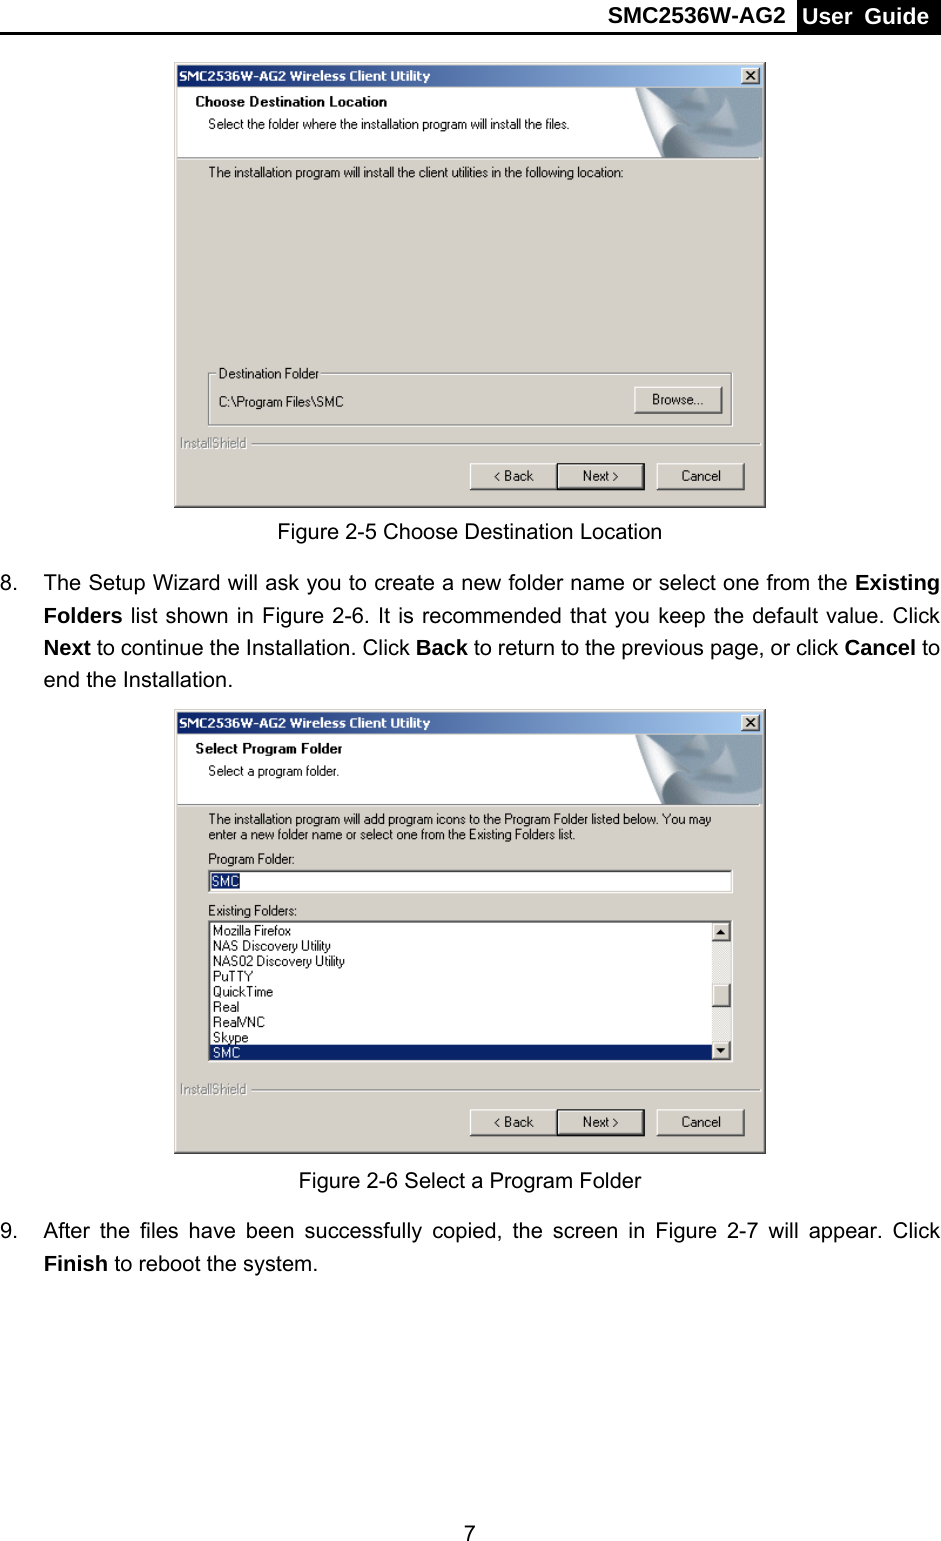 SMC2536W-AG2  User Guide   7 Figure 2-5 Choose Destination Location 8.  The Setup Wizard will ask you to create a new folder name or select one from the Existing Folders list shown in Figure 2-6. It is recommended that you keep the default value. Click Next to continue the Installation. Click Back to return to the previous page, or click Cancel to end the Installation.  Figure 2-6 Select a Program Folder 9.  After the files have been successfully copied, the screen in Figure 2-7 will appear. Click Finish to reboot the system. 